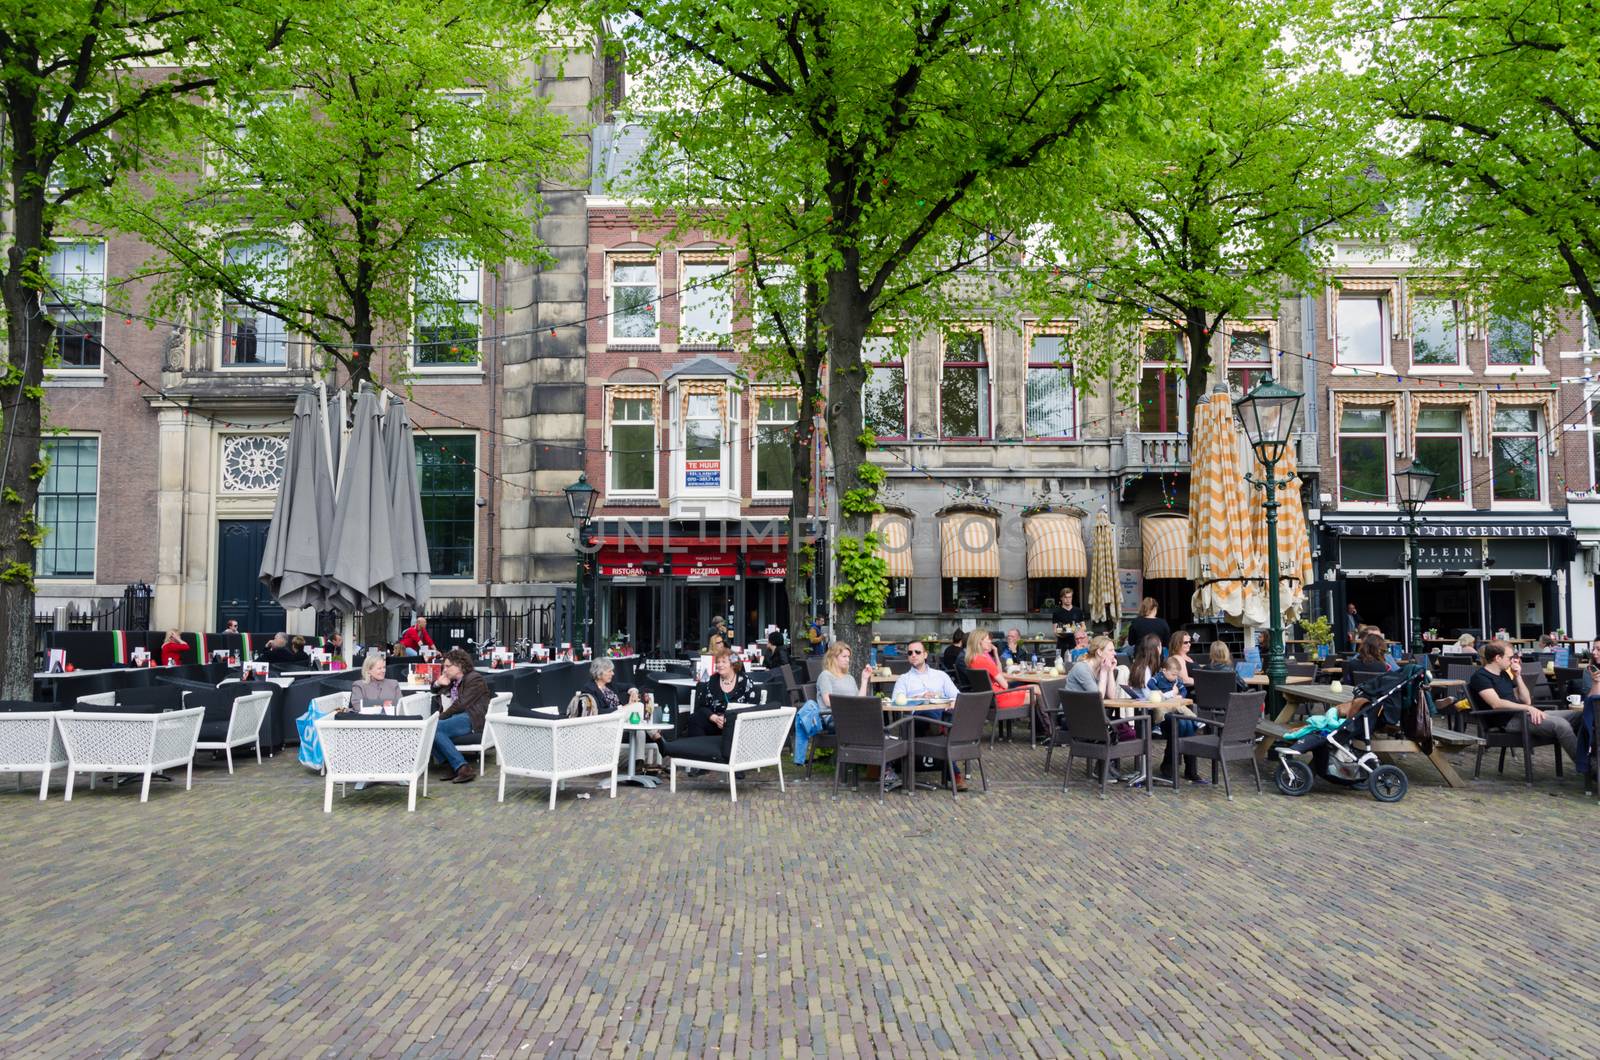 The Hague, Netherlands - May 8, 2015: Dutch People at Cafeteria in Het Plein in The Hague's city centre, Netherlands. on May 8, 2015.